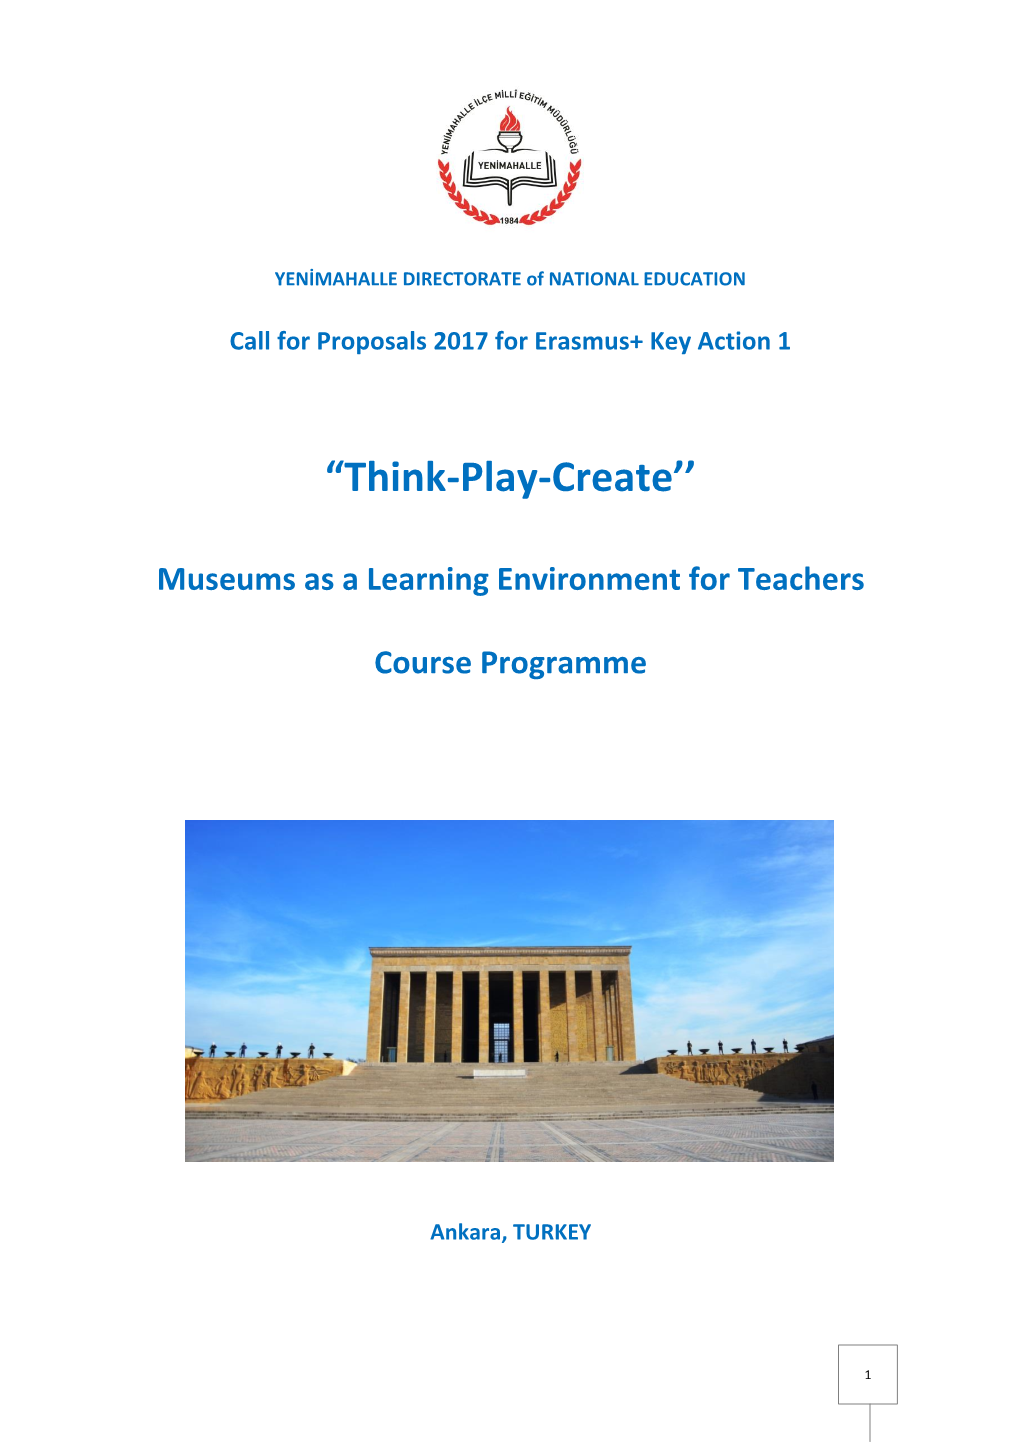 Think-Play-Create'' Museums As a Learning Environment for Teachers